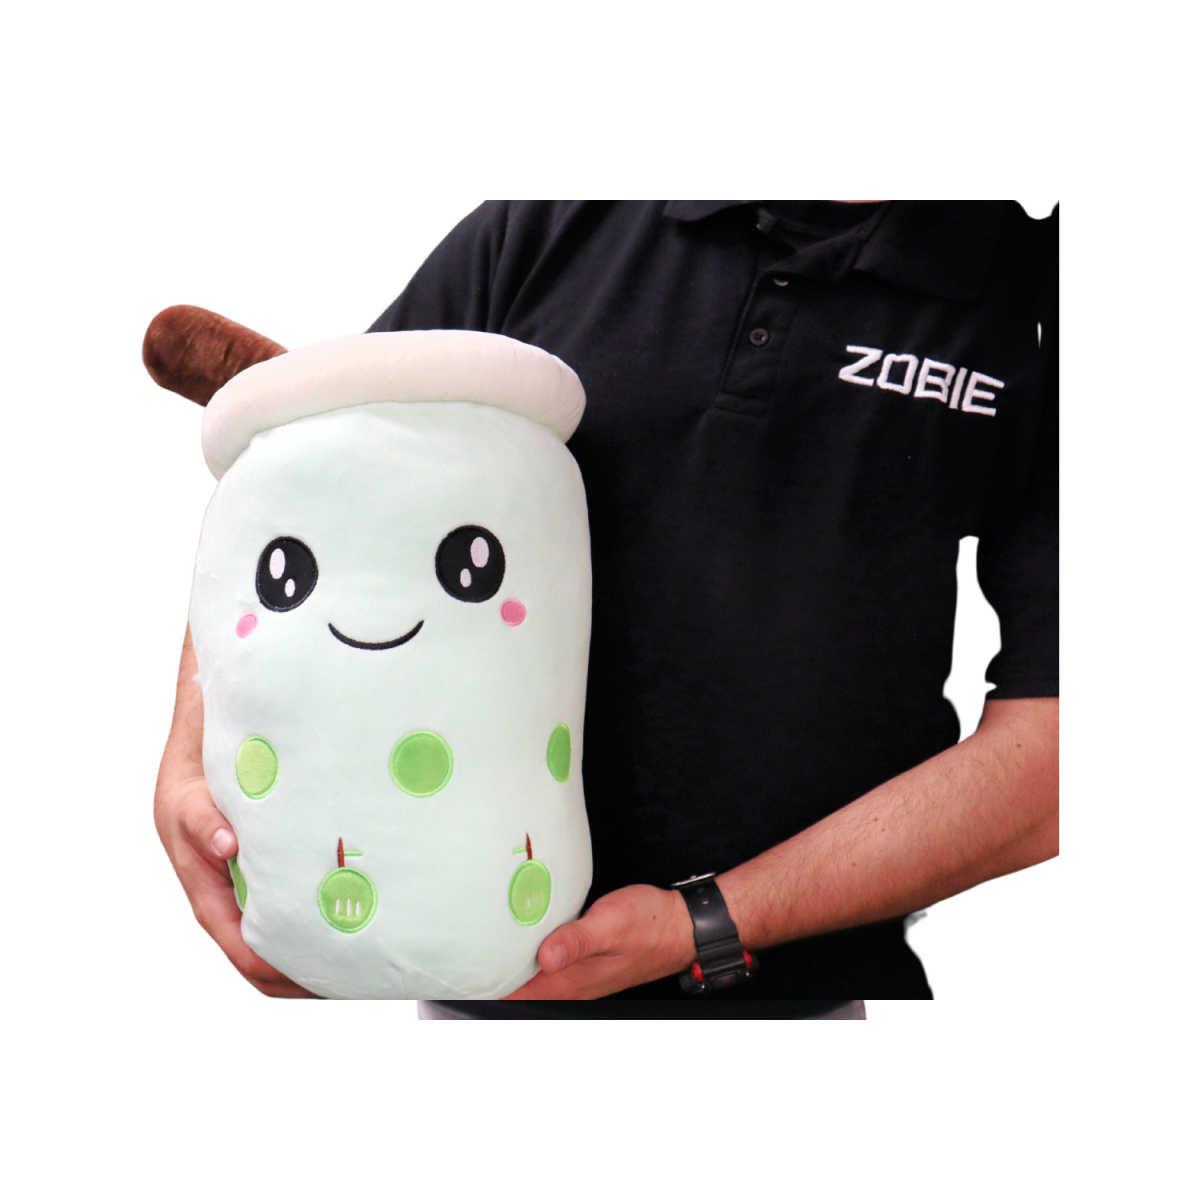 Boba Tea "L" Size Apple Plushie Toy (Open Eyes) - 20 Inches Tall/ 10 Inches Wide-Plushie-Zobie Productions-Zobie Productions